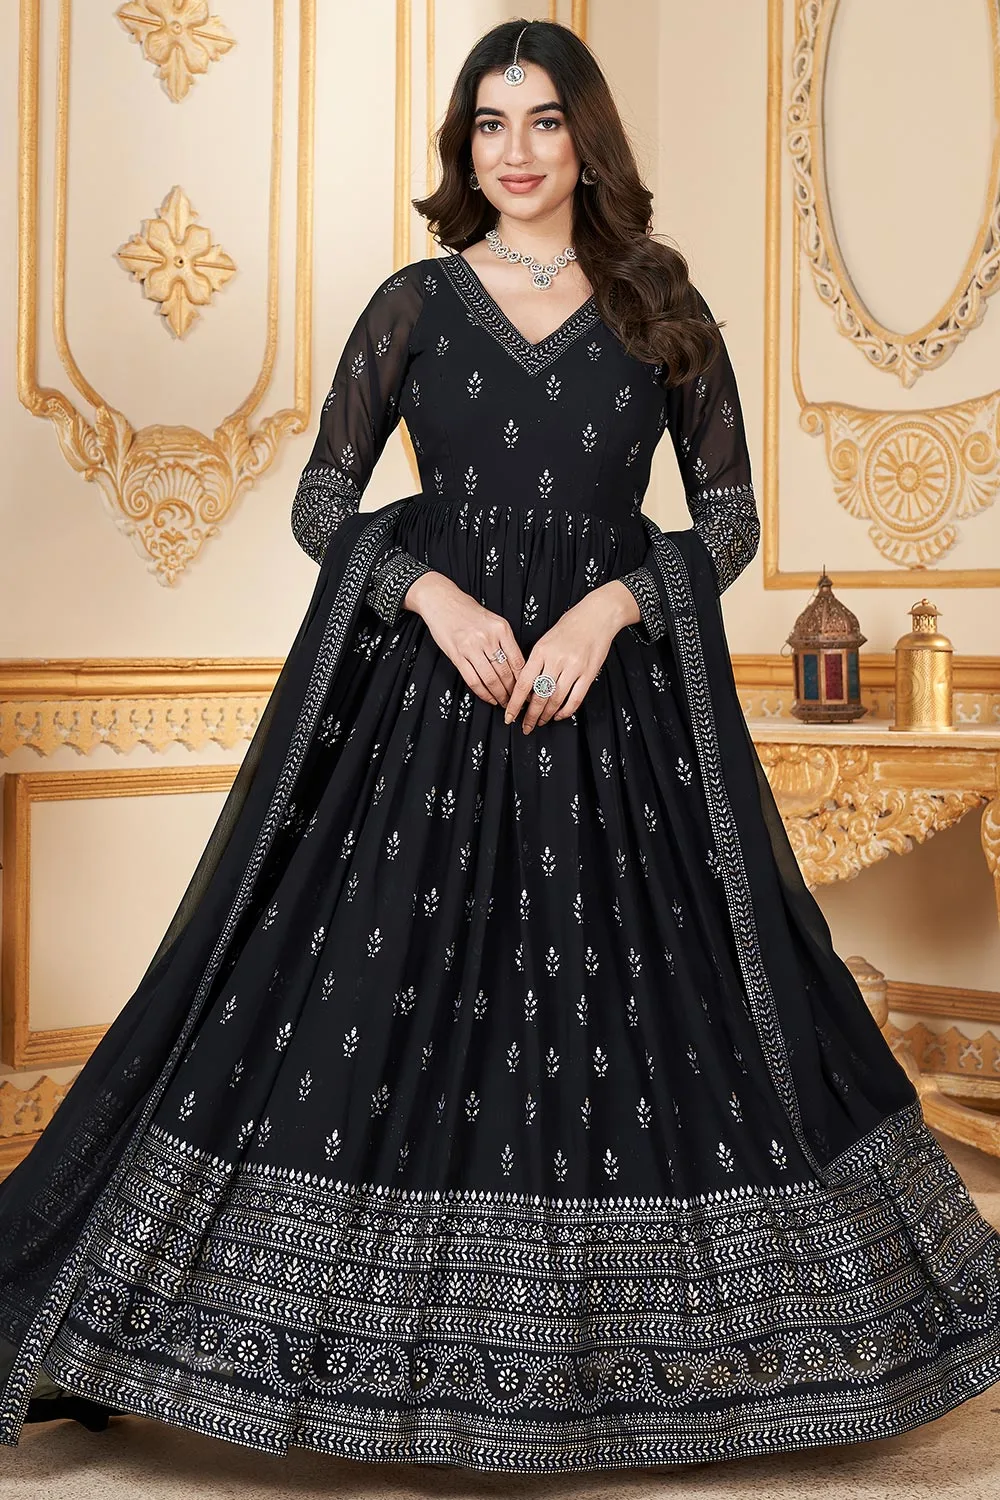 New Exclusive Foil Printed Black Full Length Gown with Dupatta